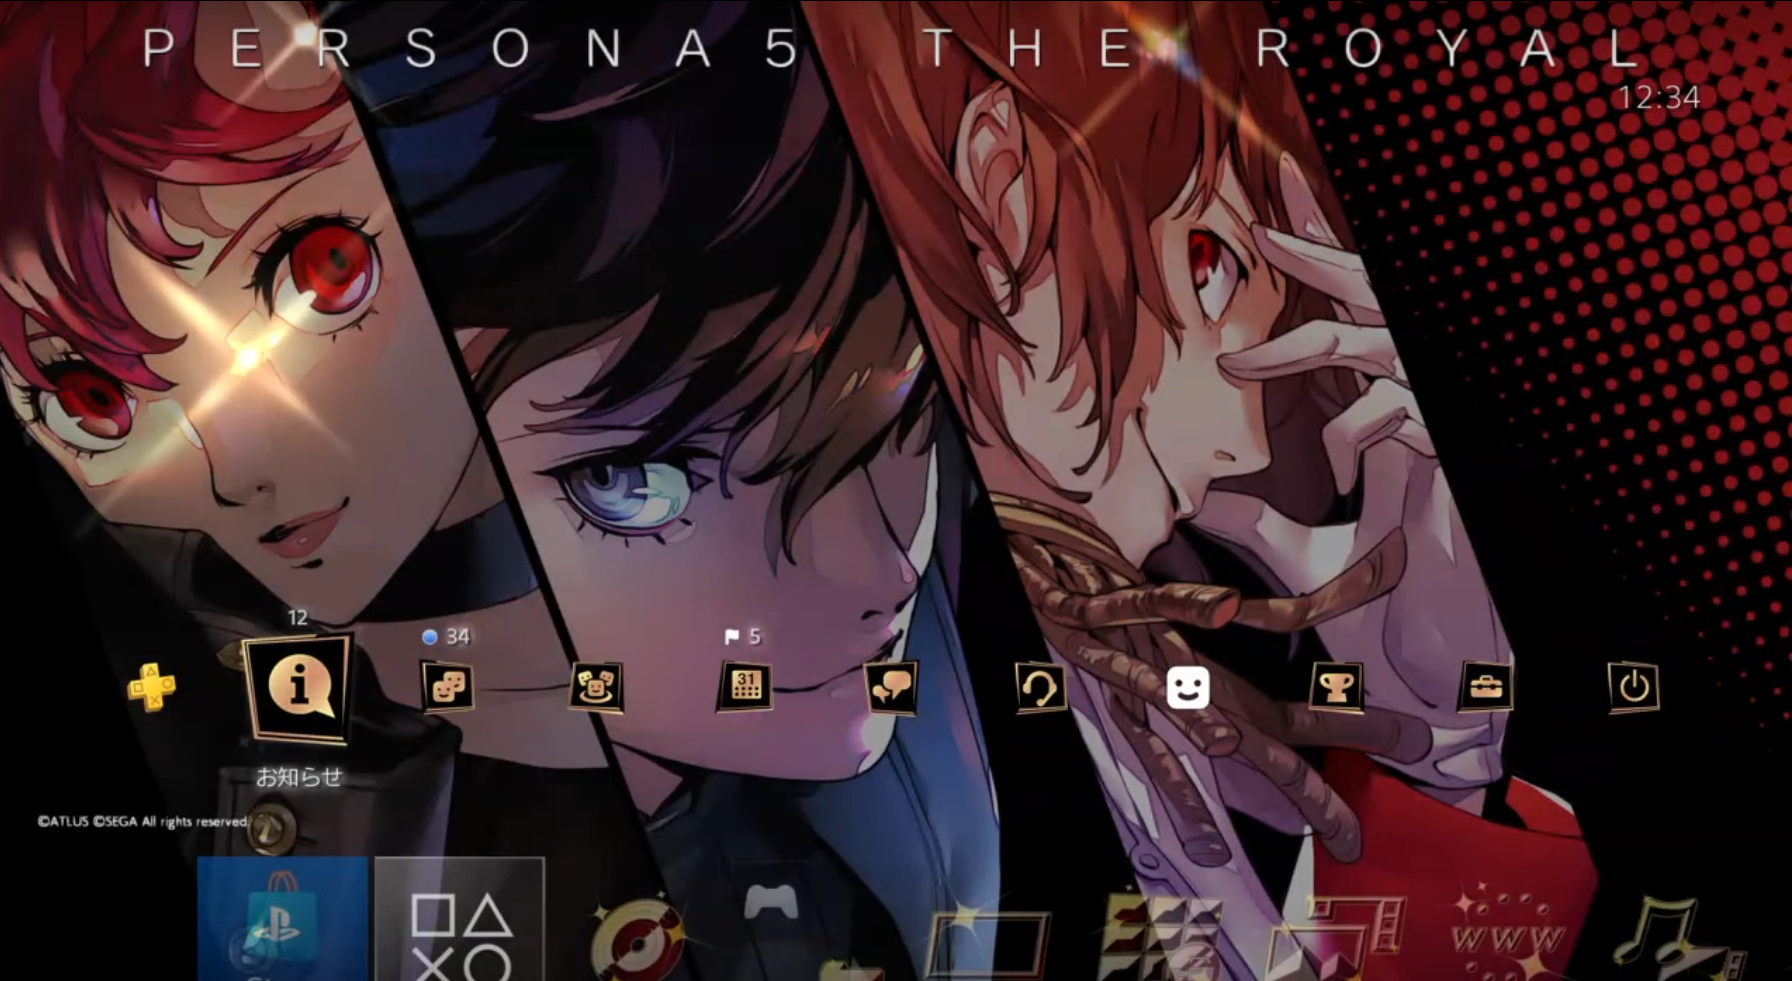 Japan Has Another Amazing Persona 5 Royal Ps4 Theme Push Square